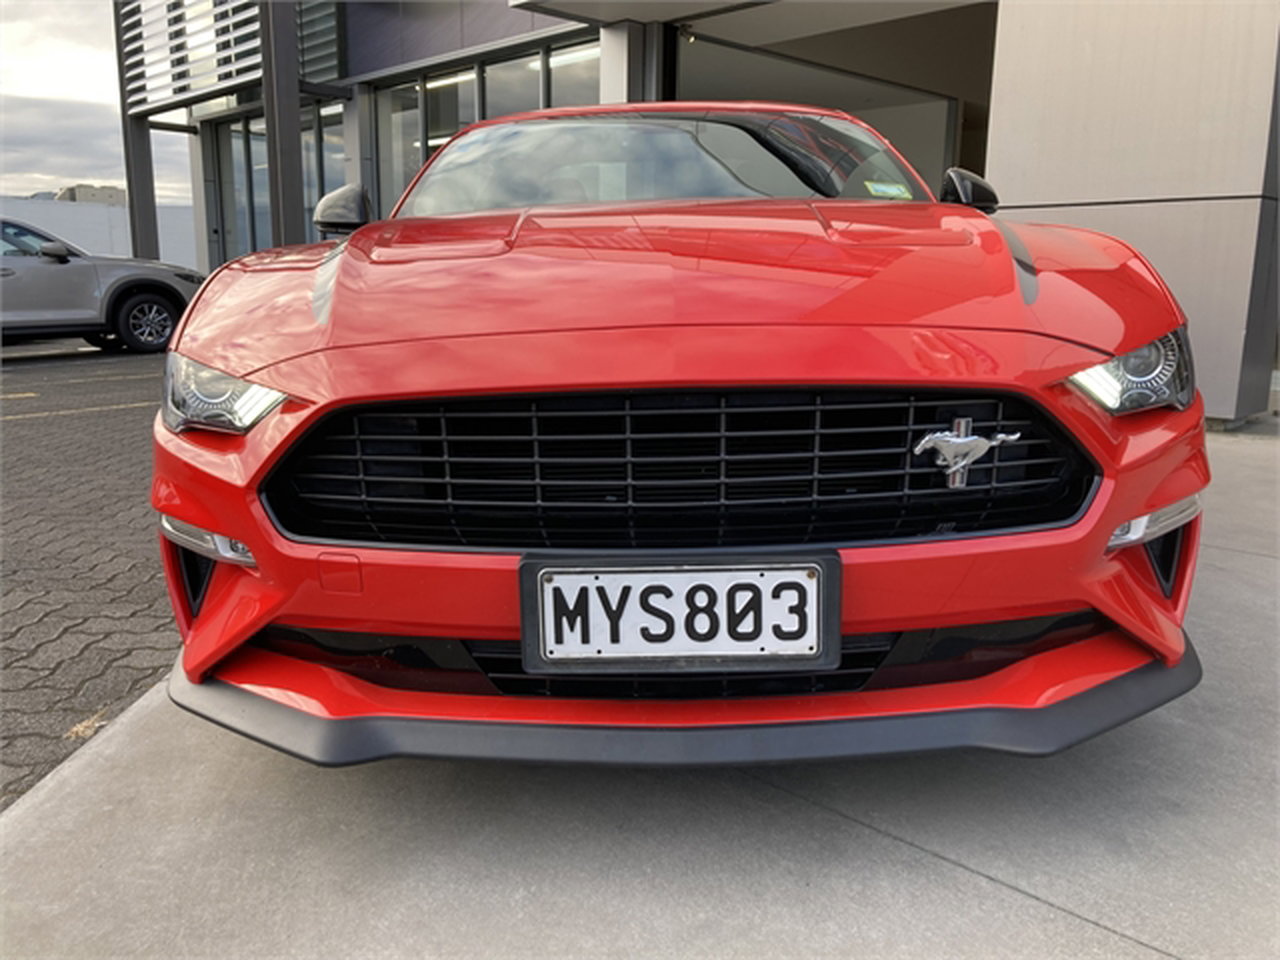 2020 Ford Mustang 2.3L Fastback At 2.3